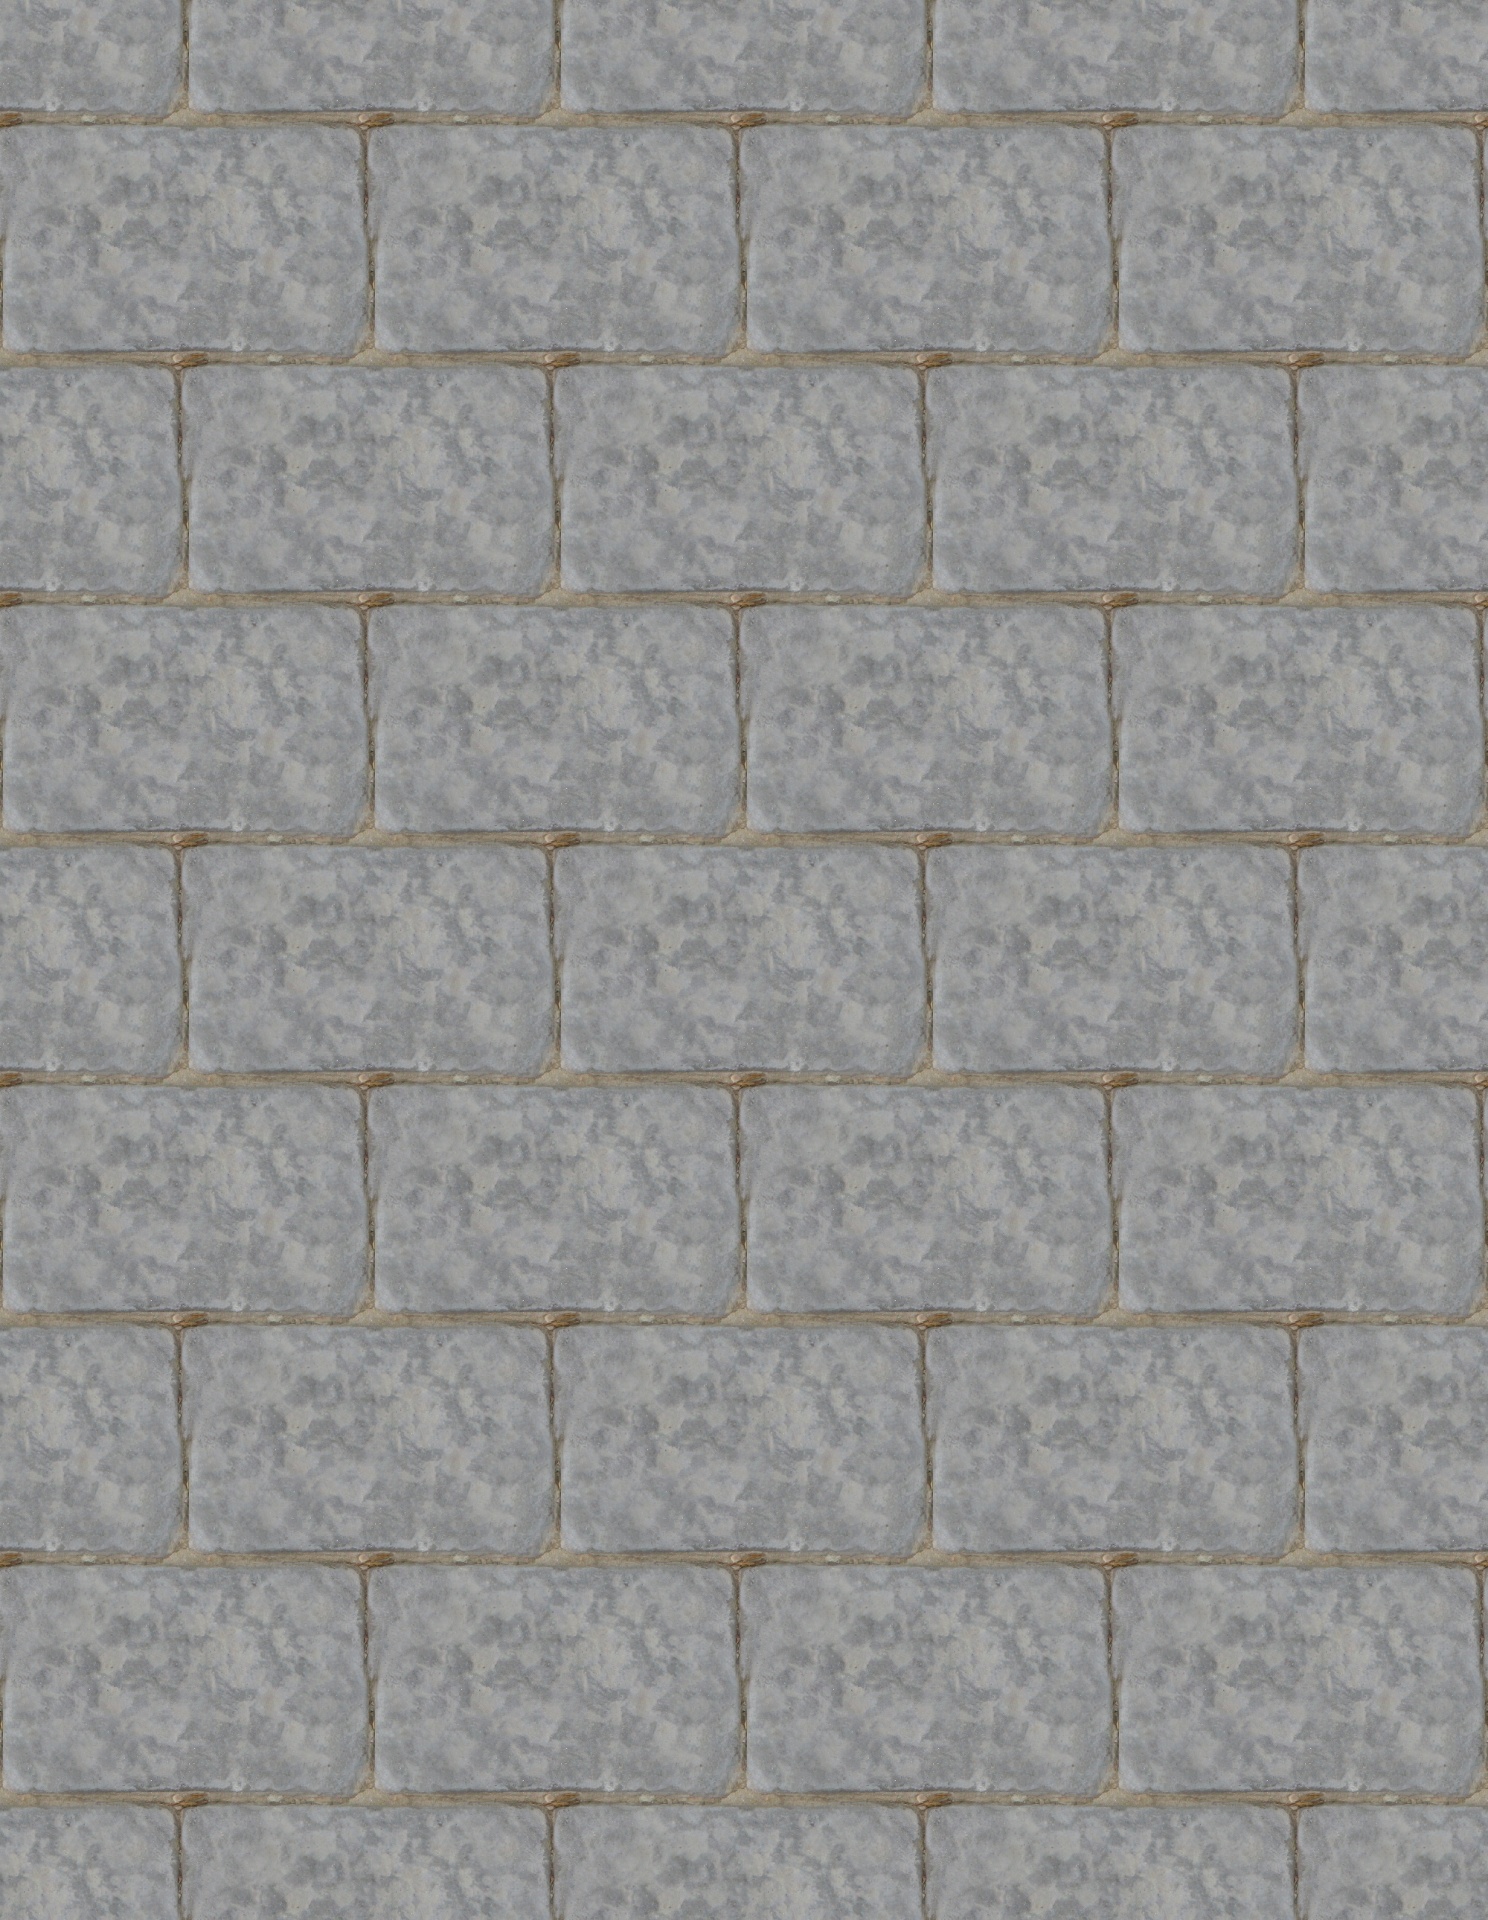 Bricks that you can tile seamlessly.